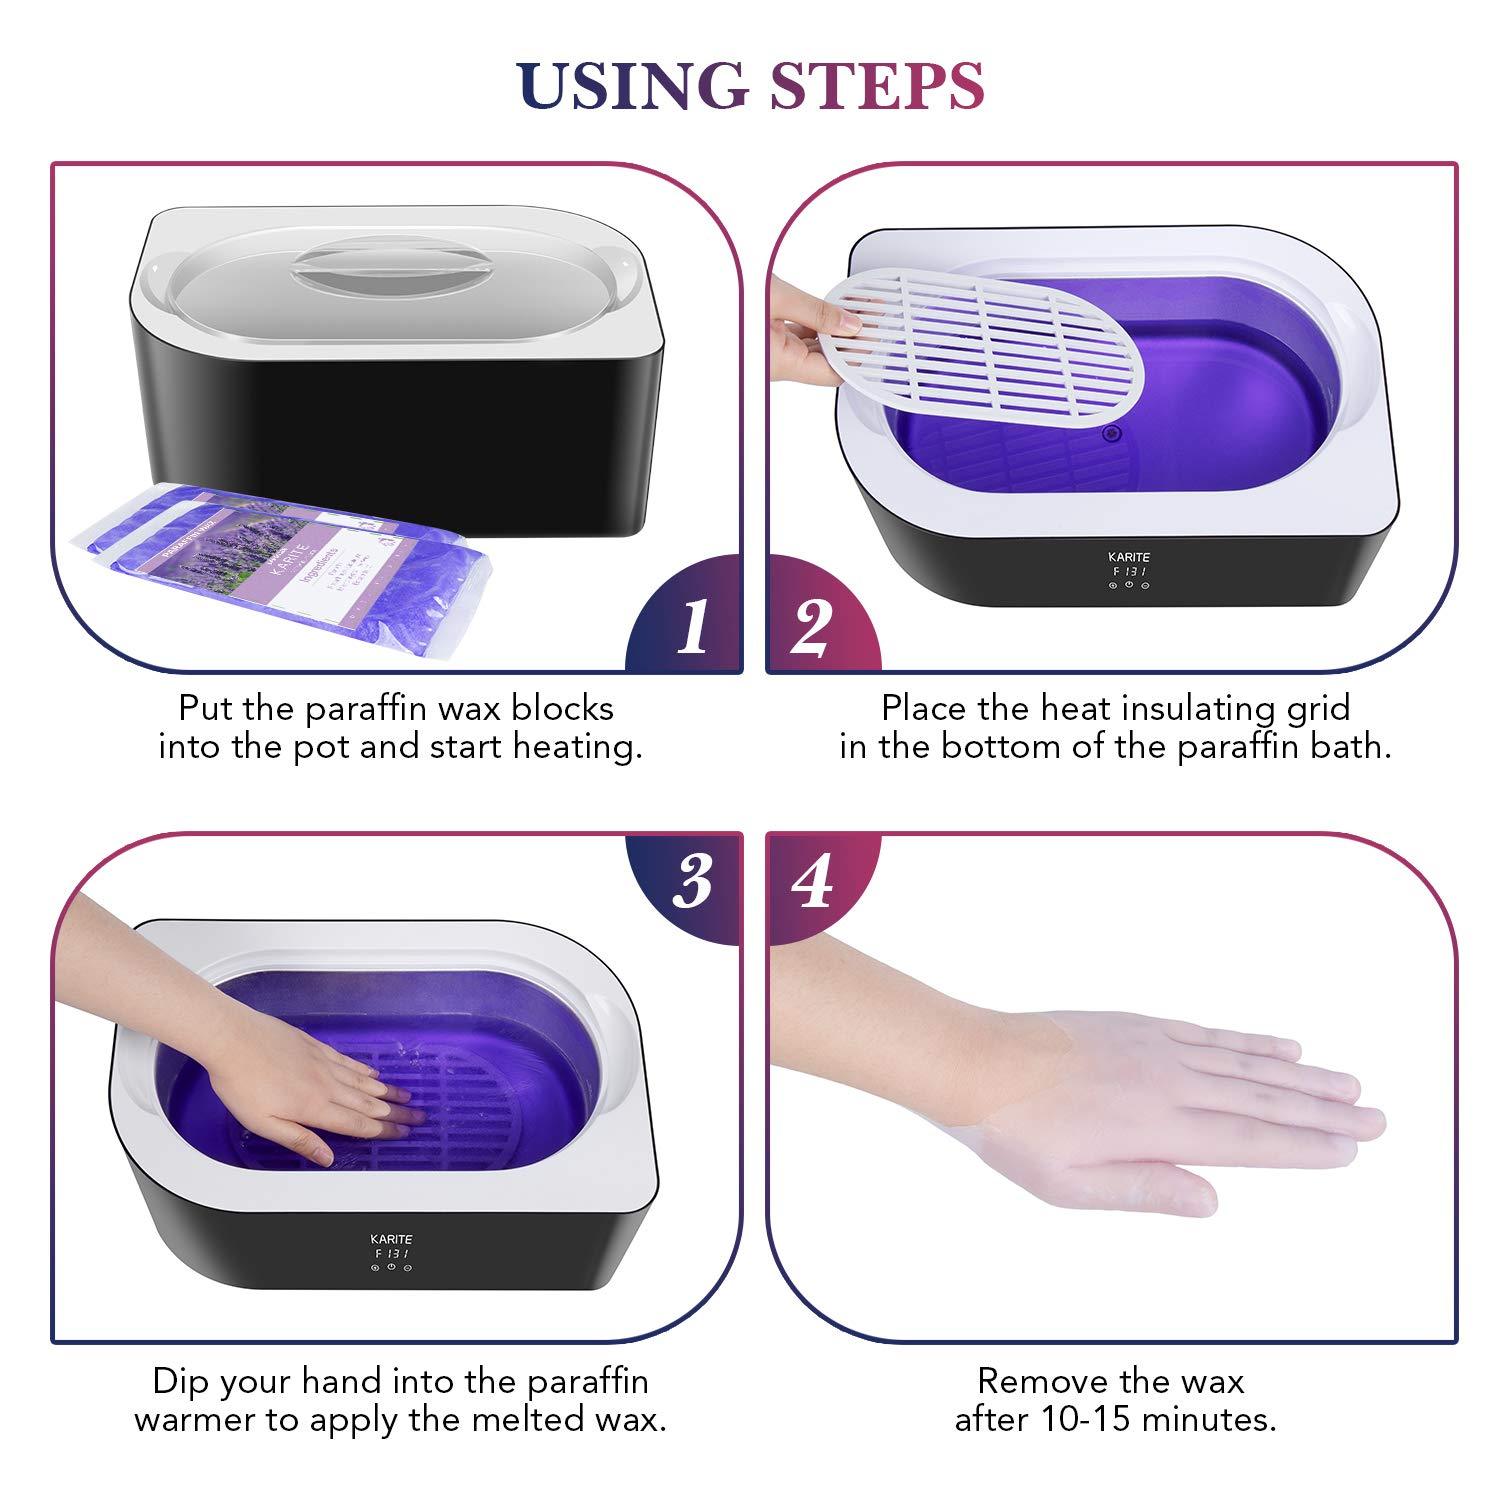 Paraffin Wax Machine for Hand and Feet - Karite Paraffin Wax Bath 4000ml Paraffin Wax Warmer Moisturizing Kit Auto-time and Keep Warm Paraffin Hand Wax Machine - image 5 of 8